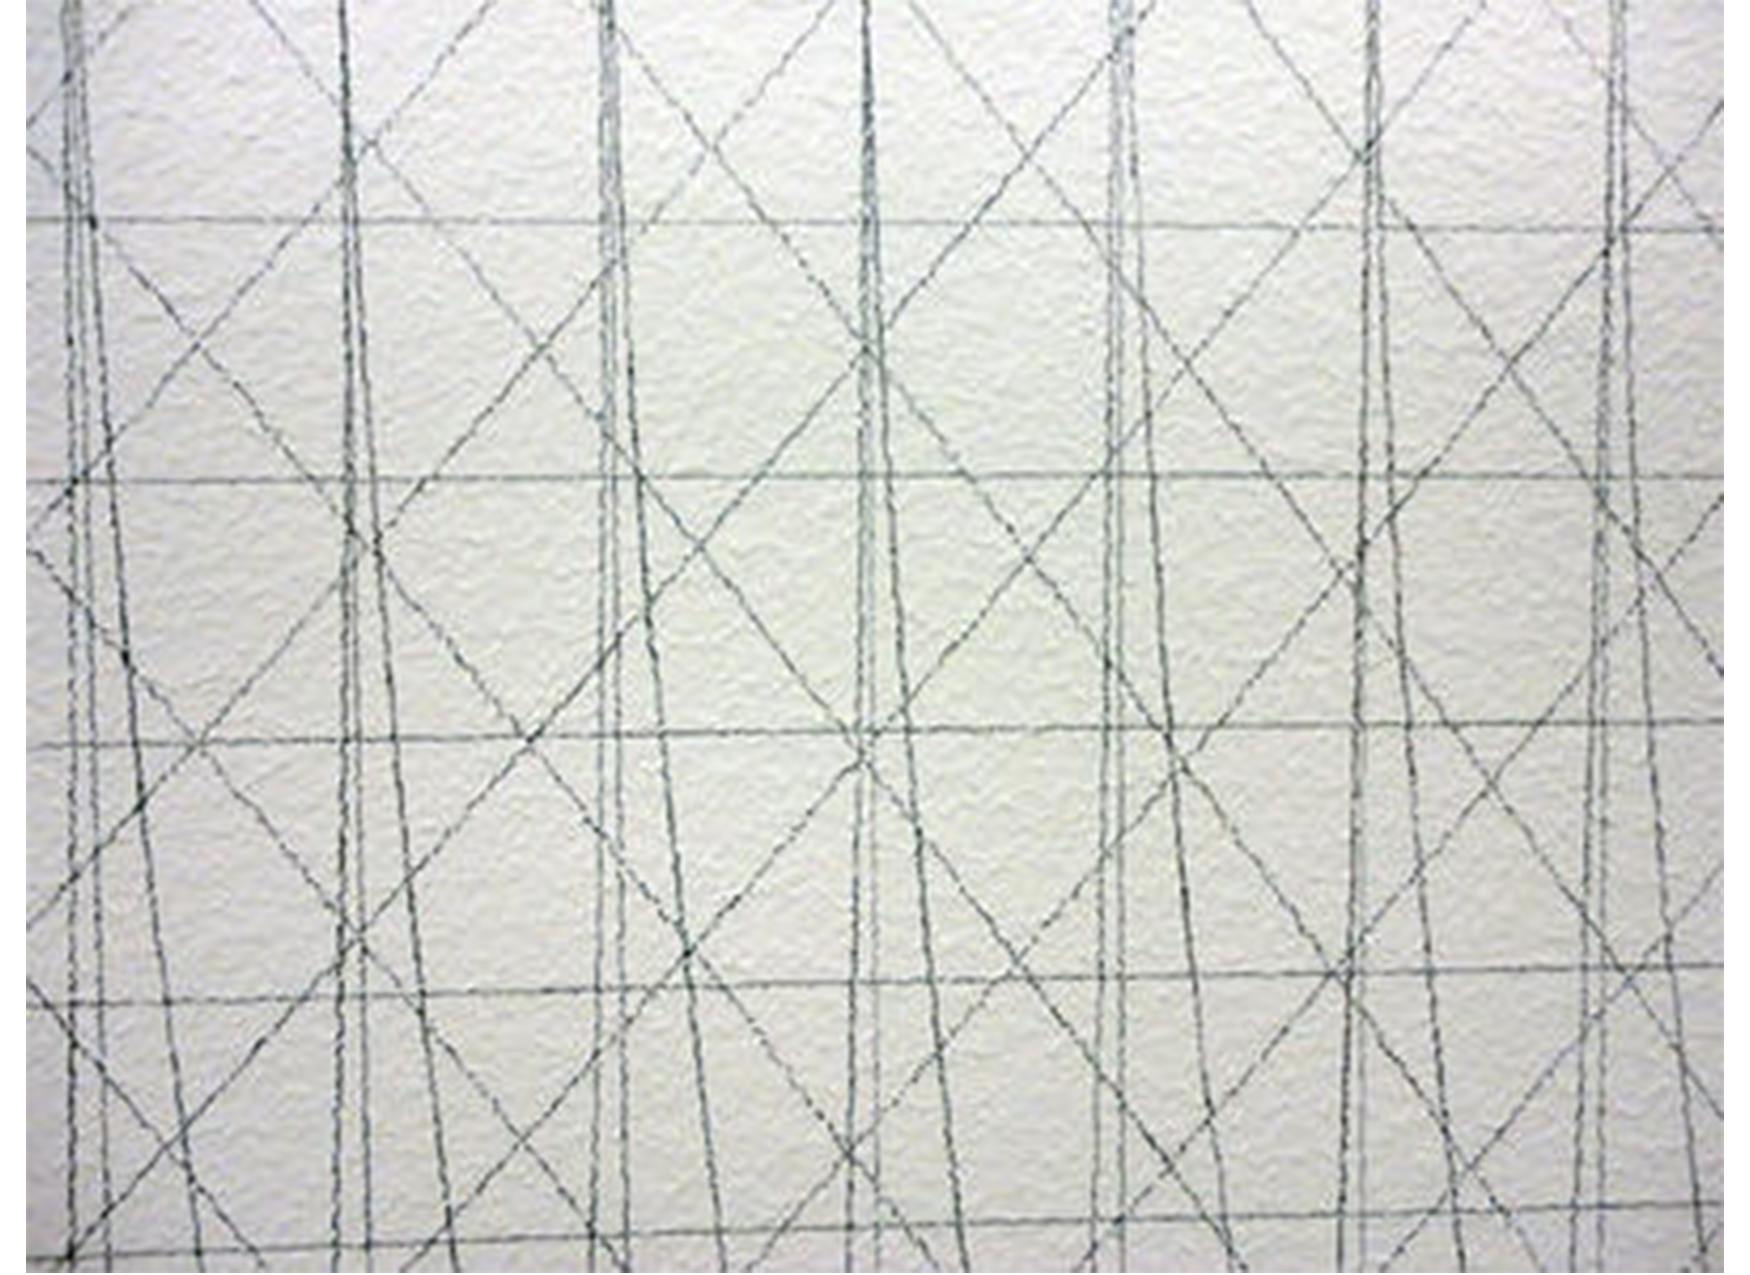 gray lines arranged in a grid